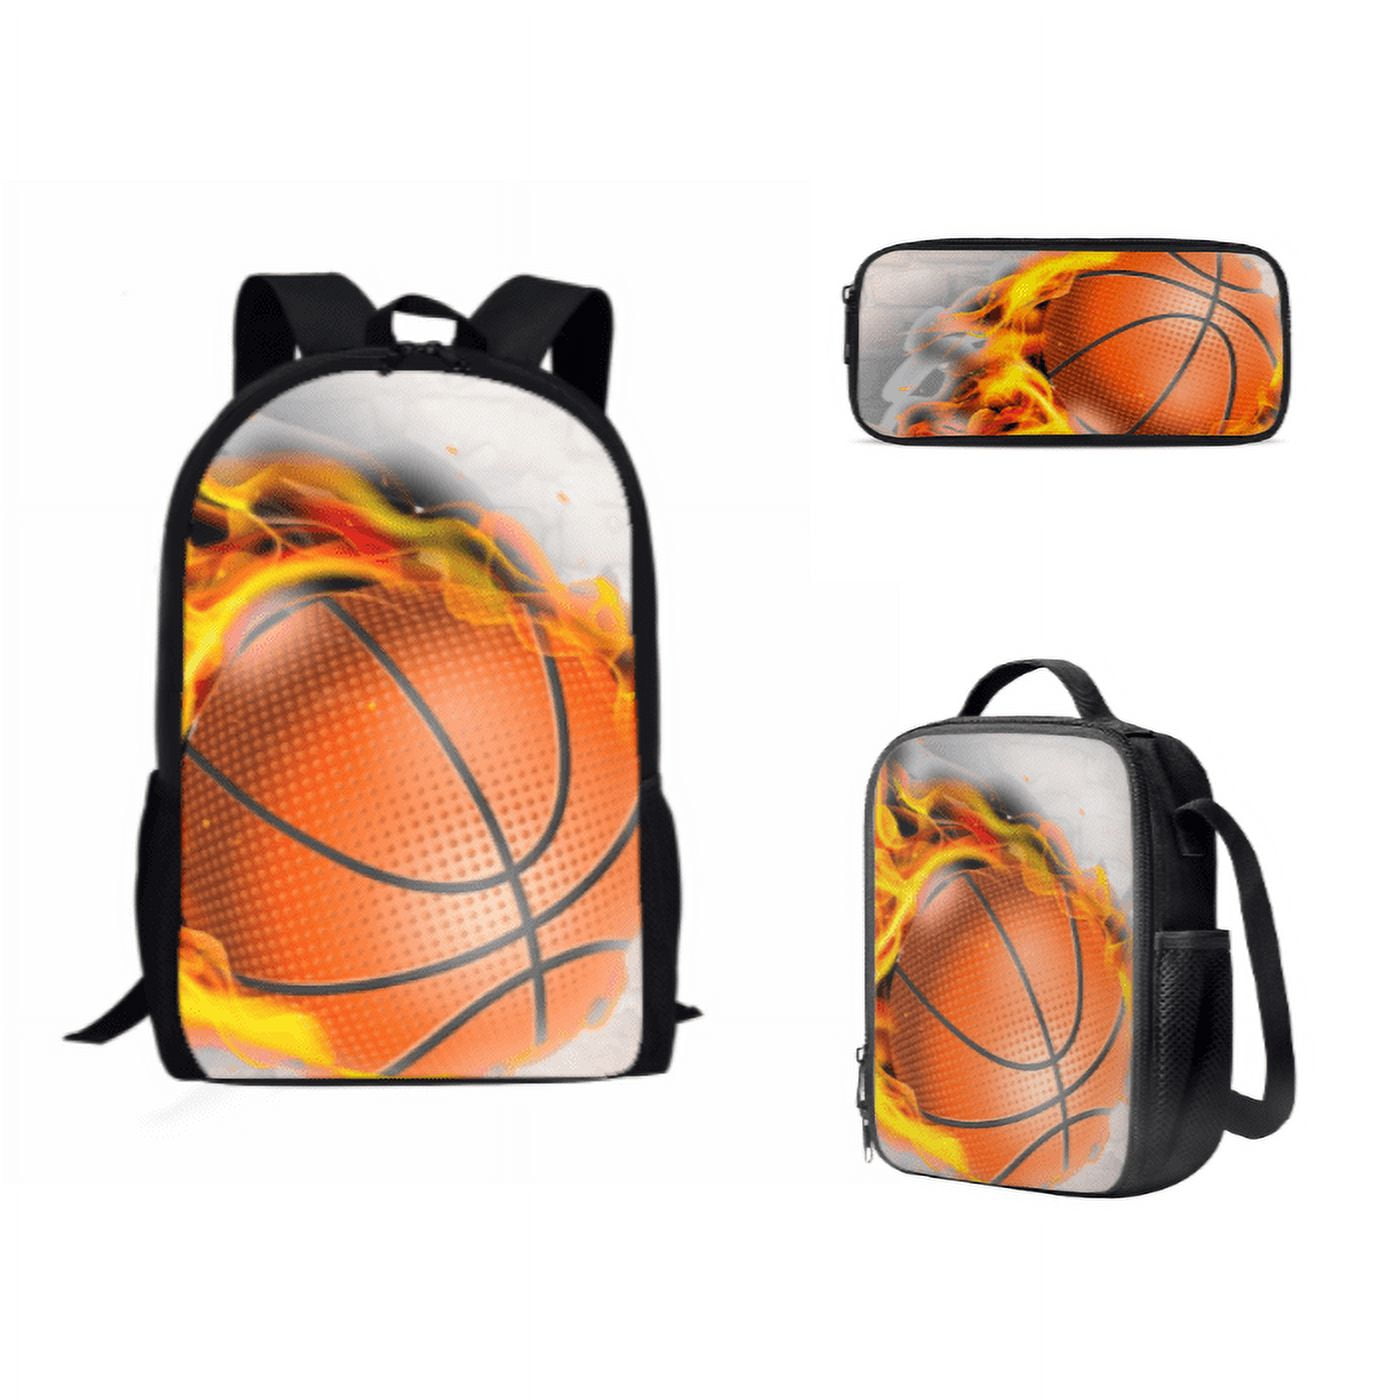 NETILGEN Water & Fire Football Design School Bags for Teen Girls 14-16  Picnic Lunch Box for Secondary School Pencil Case School Supplies of 3 Pack  Suit 